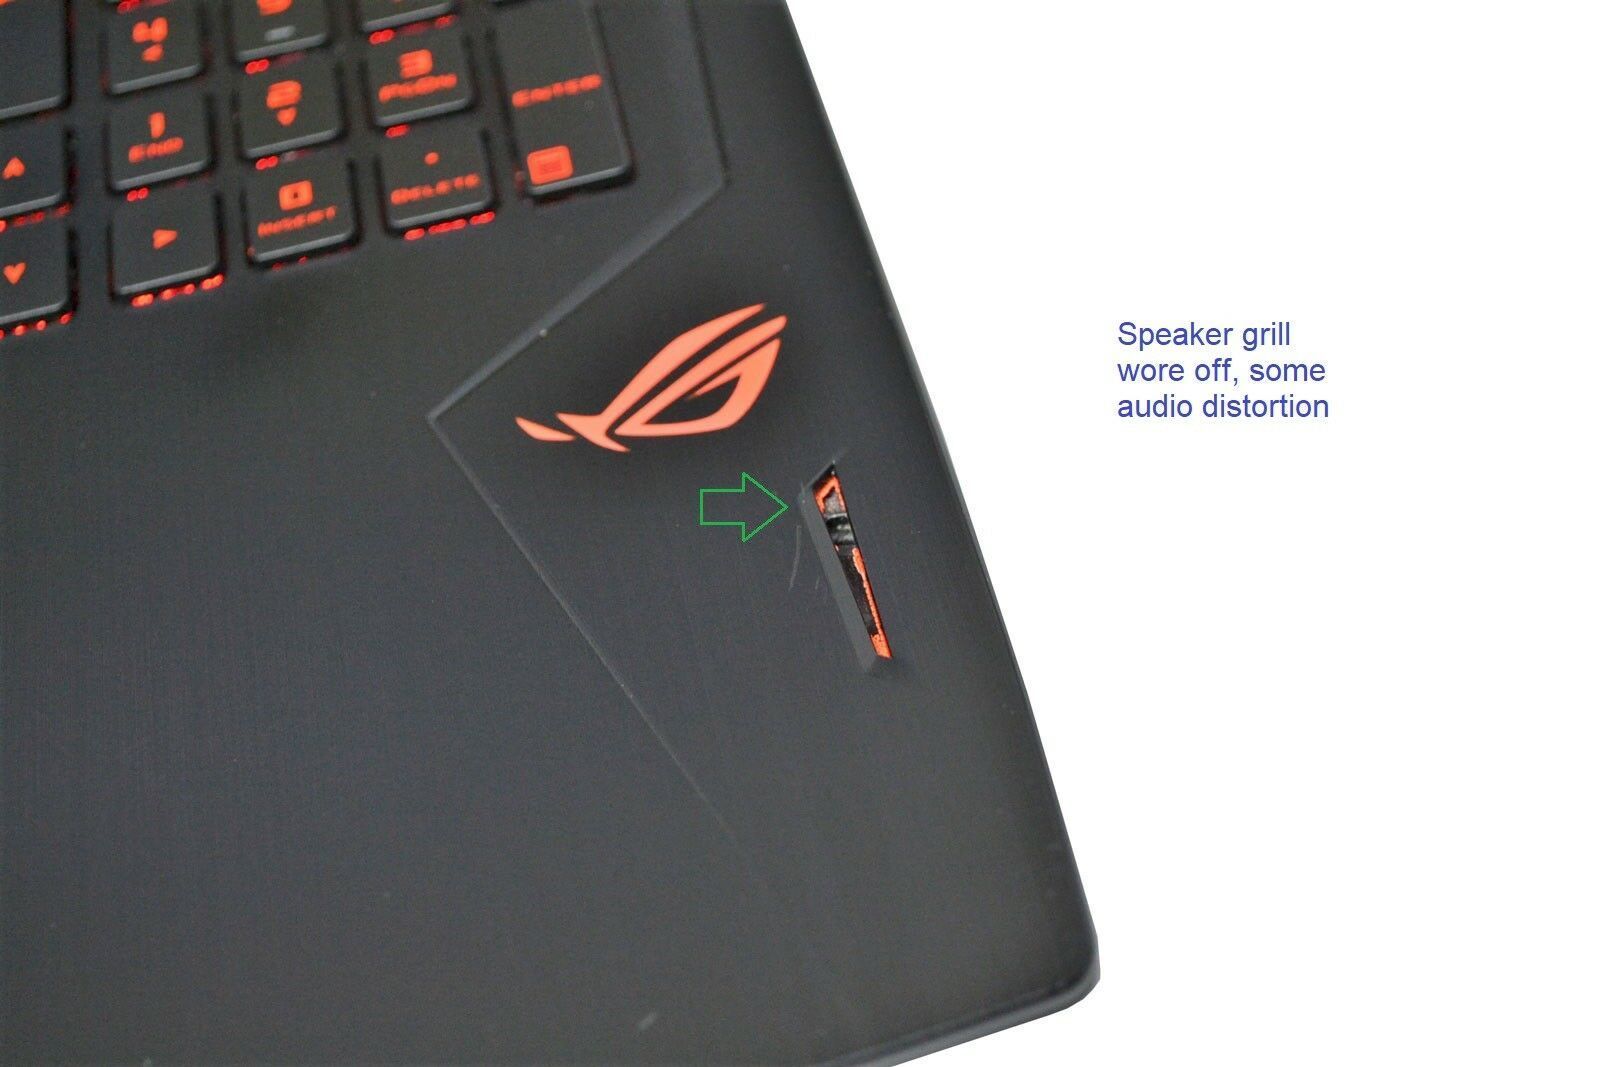 ASUS ROG GL502VM Gaming Laptop: GTX 1060, Core i5-7300HQ, GSYNC (speakers issue) - CruiseTech